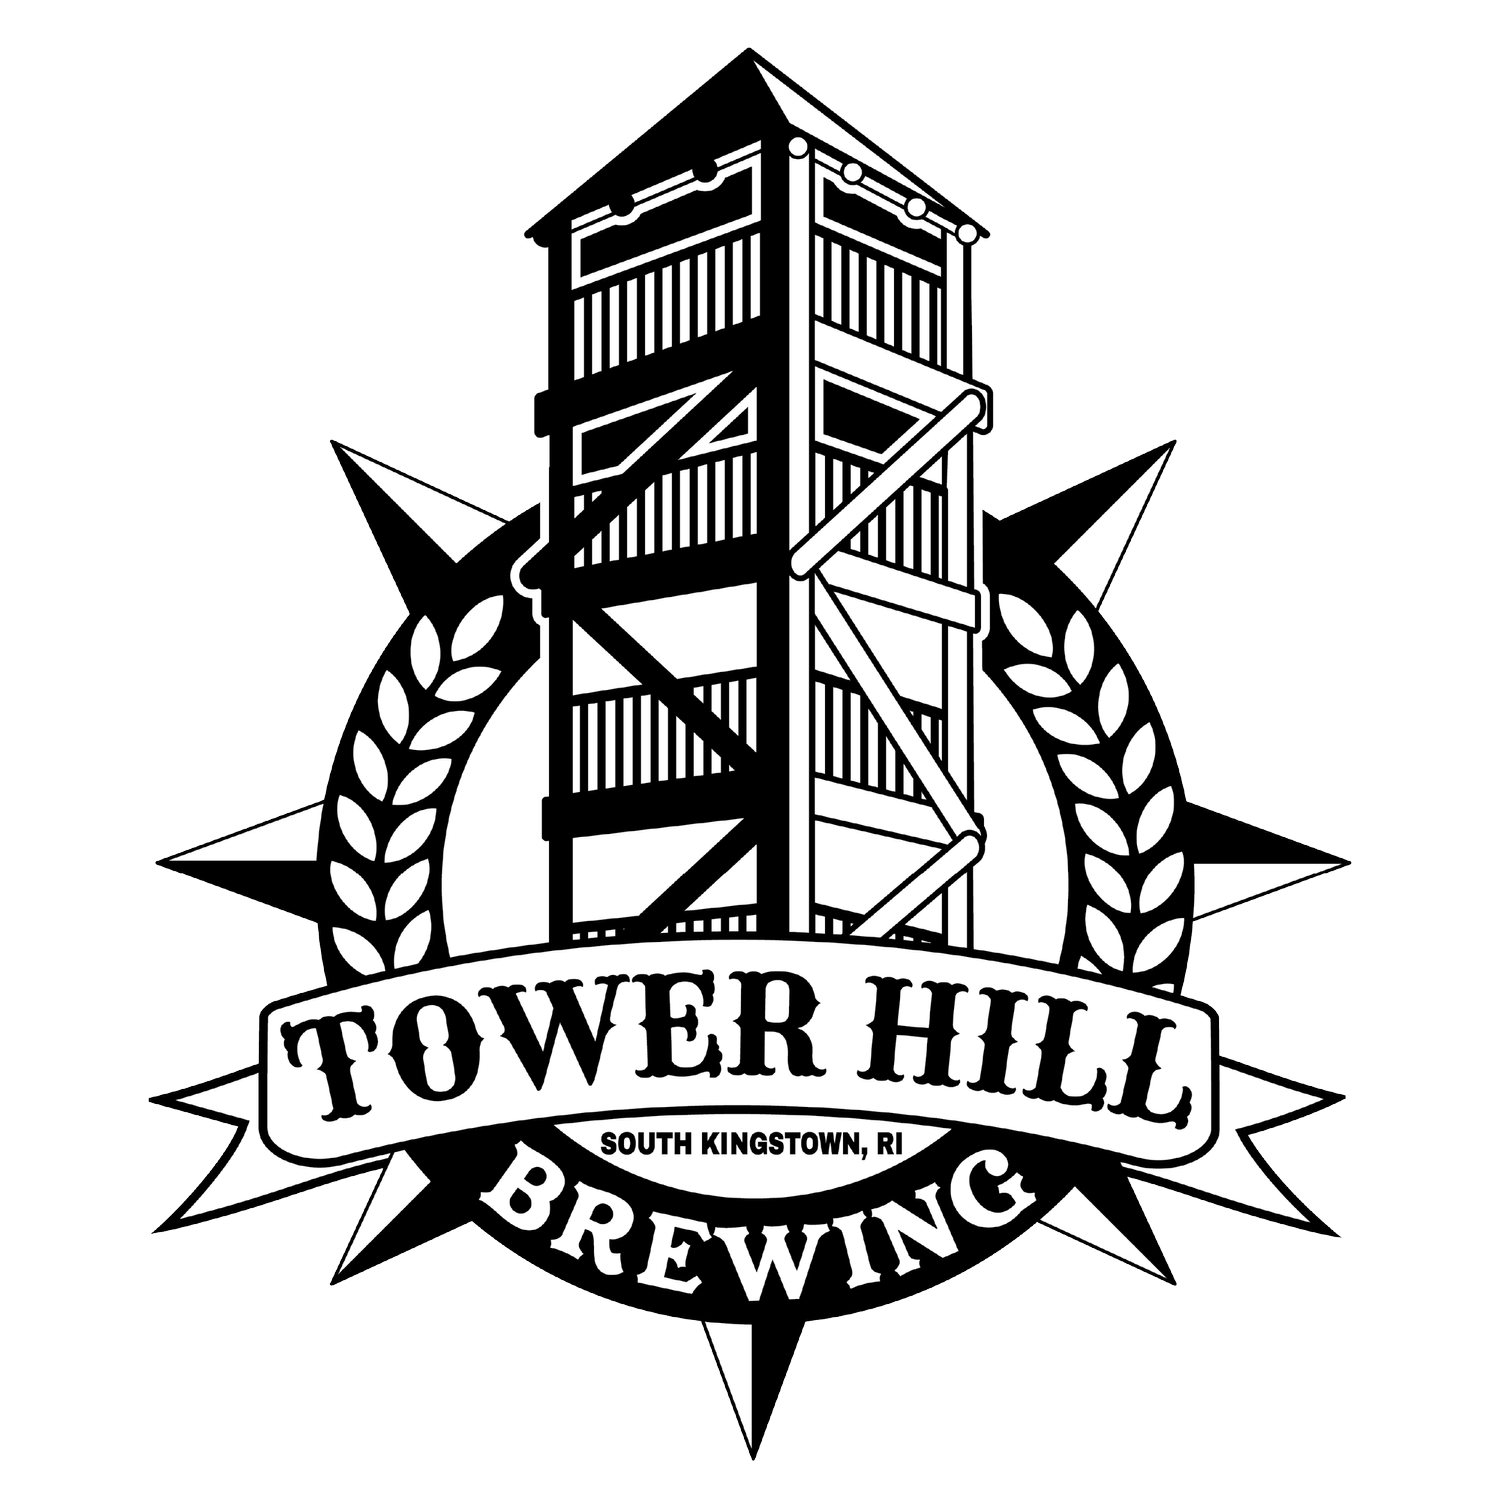 Tower Hill Brewing Co.